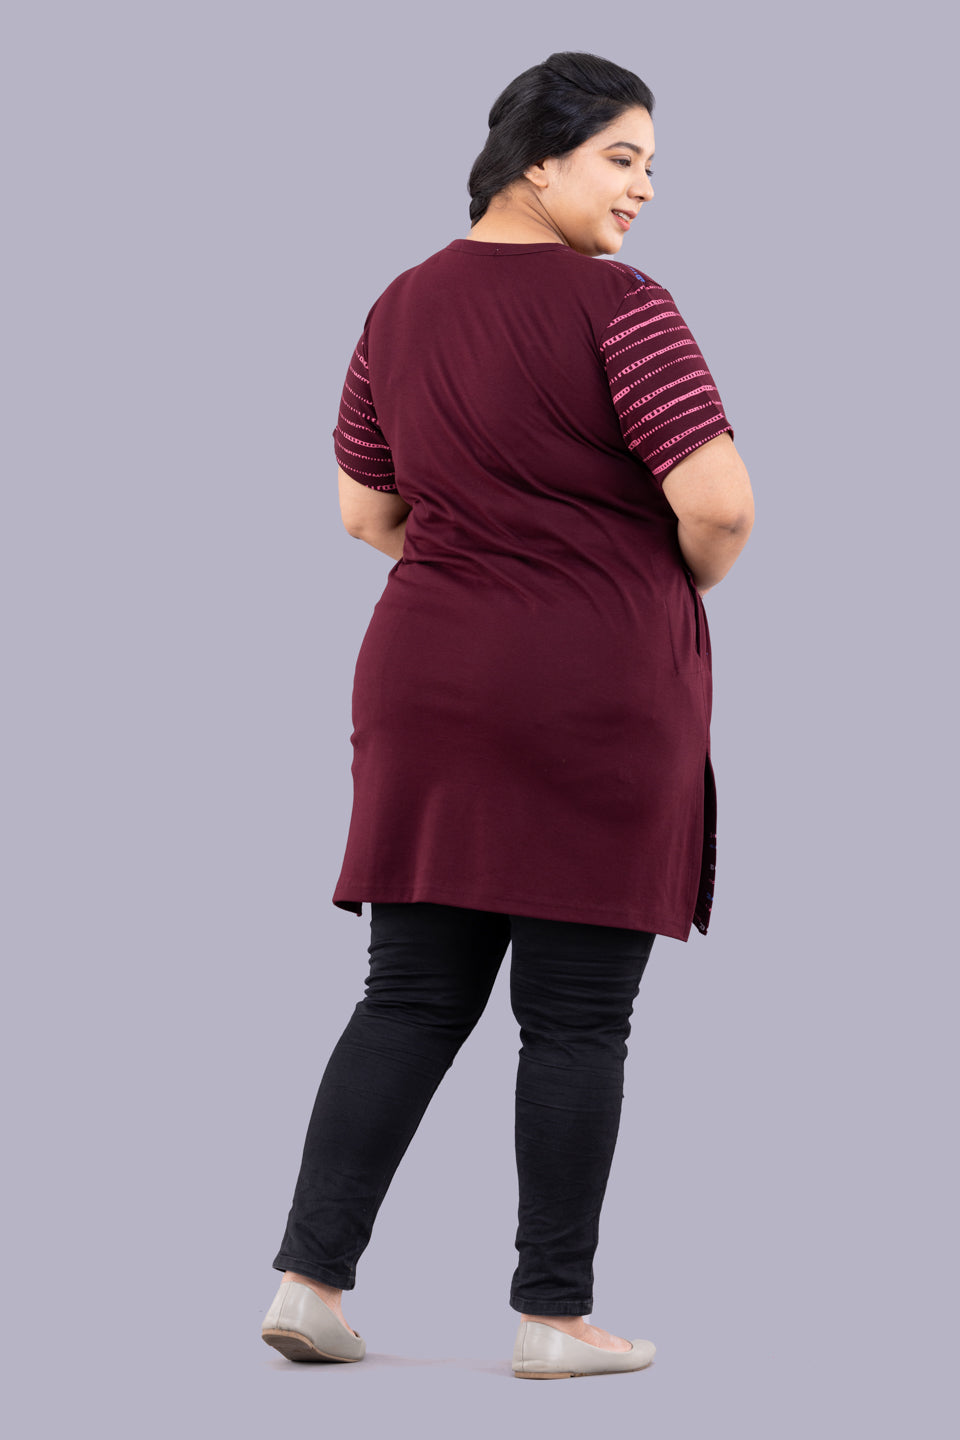 Plus Size Printed Long Tops for Women Full Sleeves - Wine At Best Prices